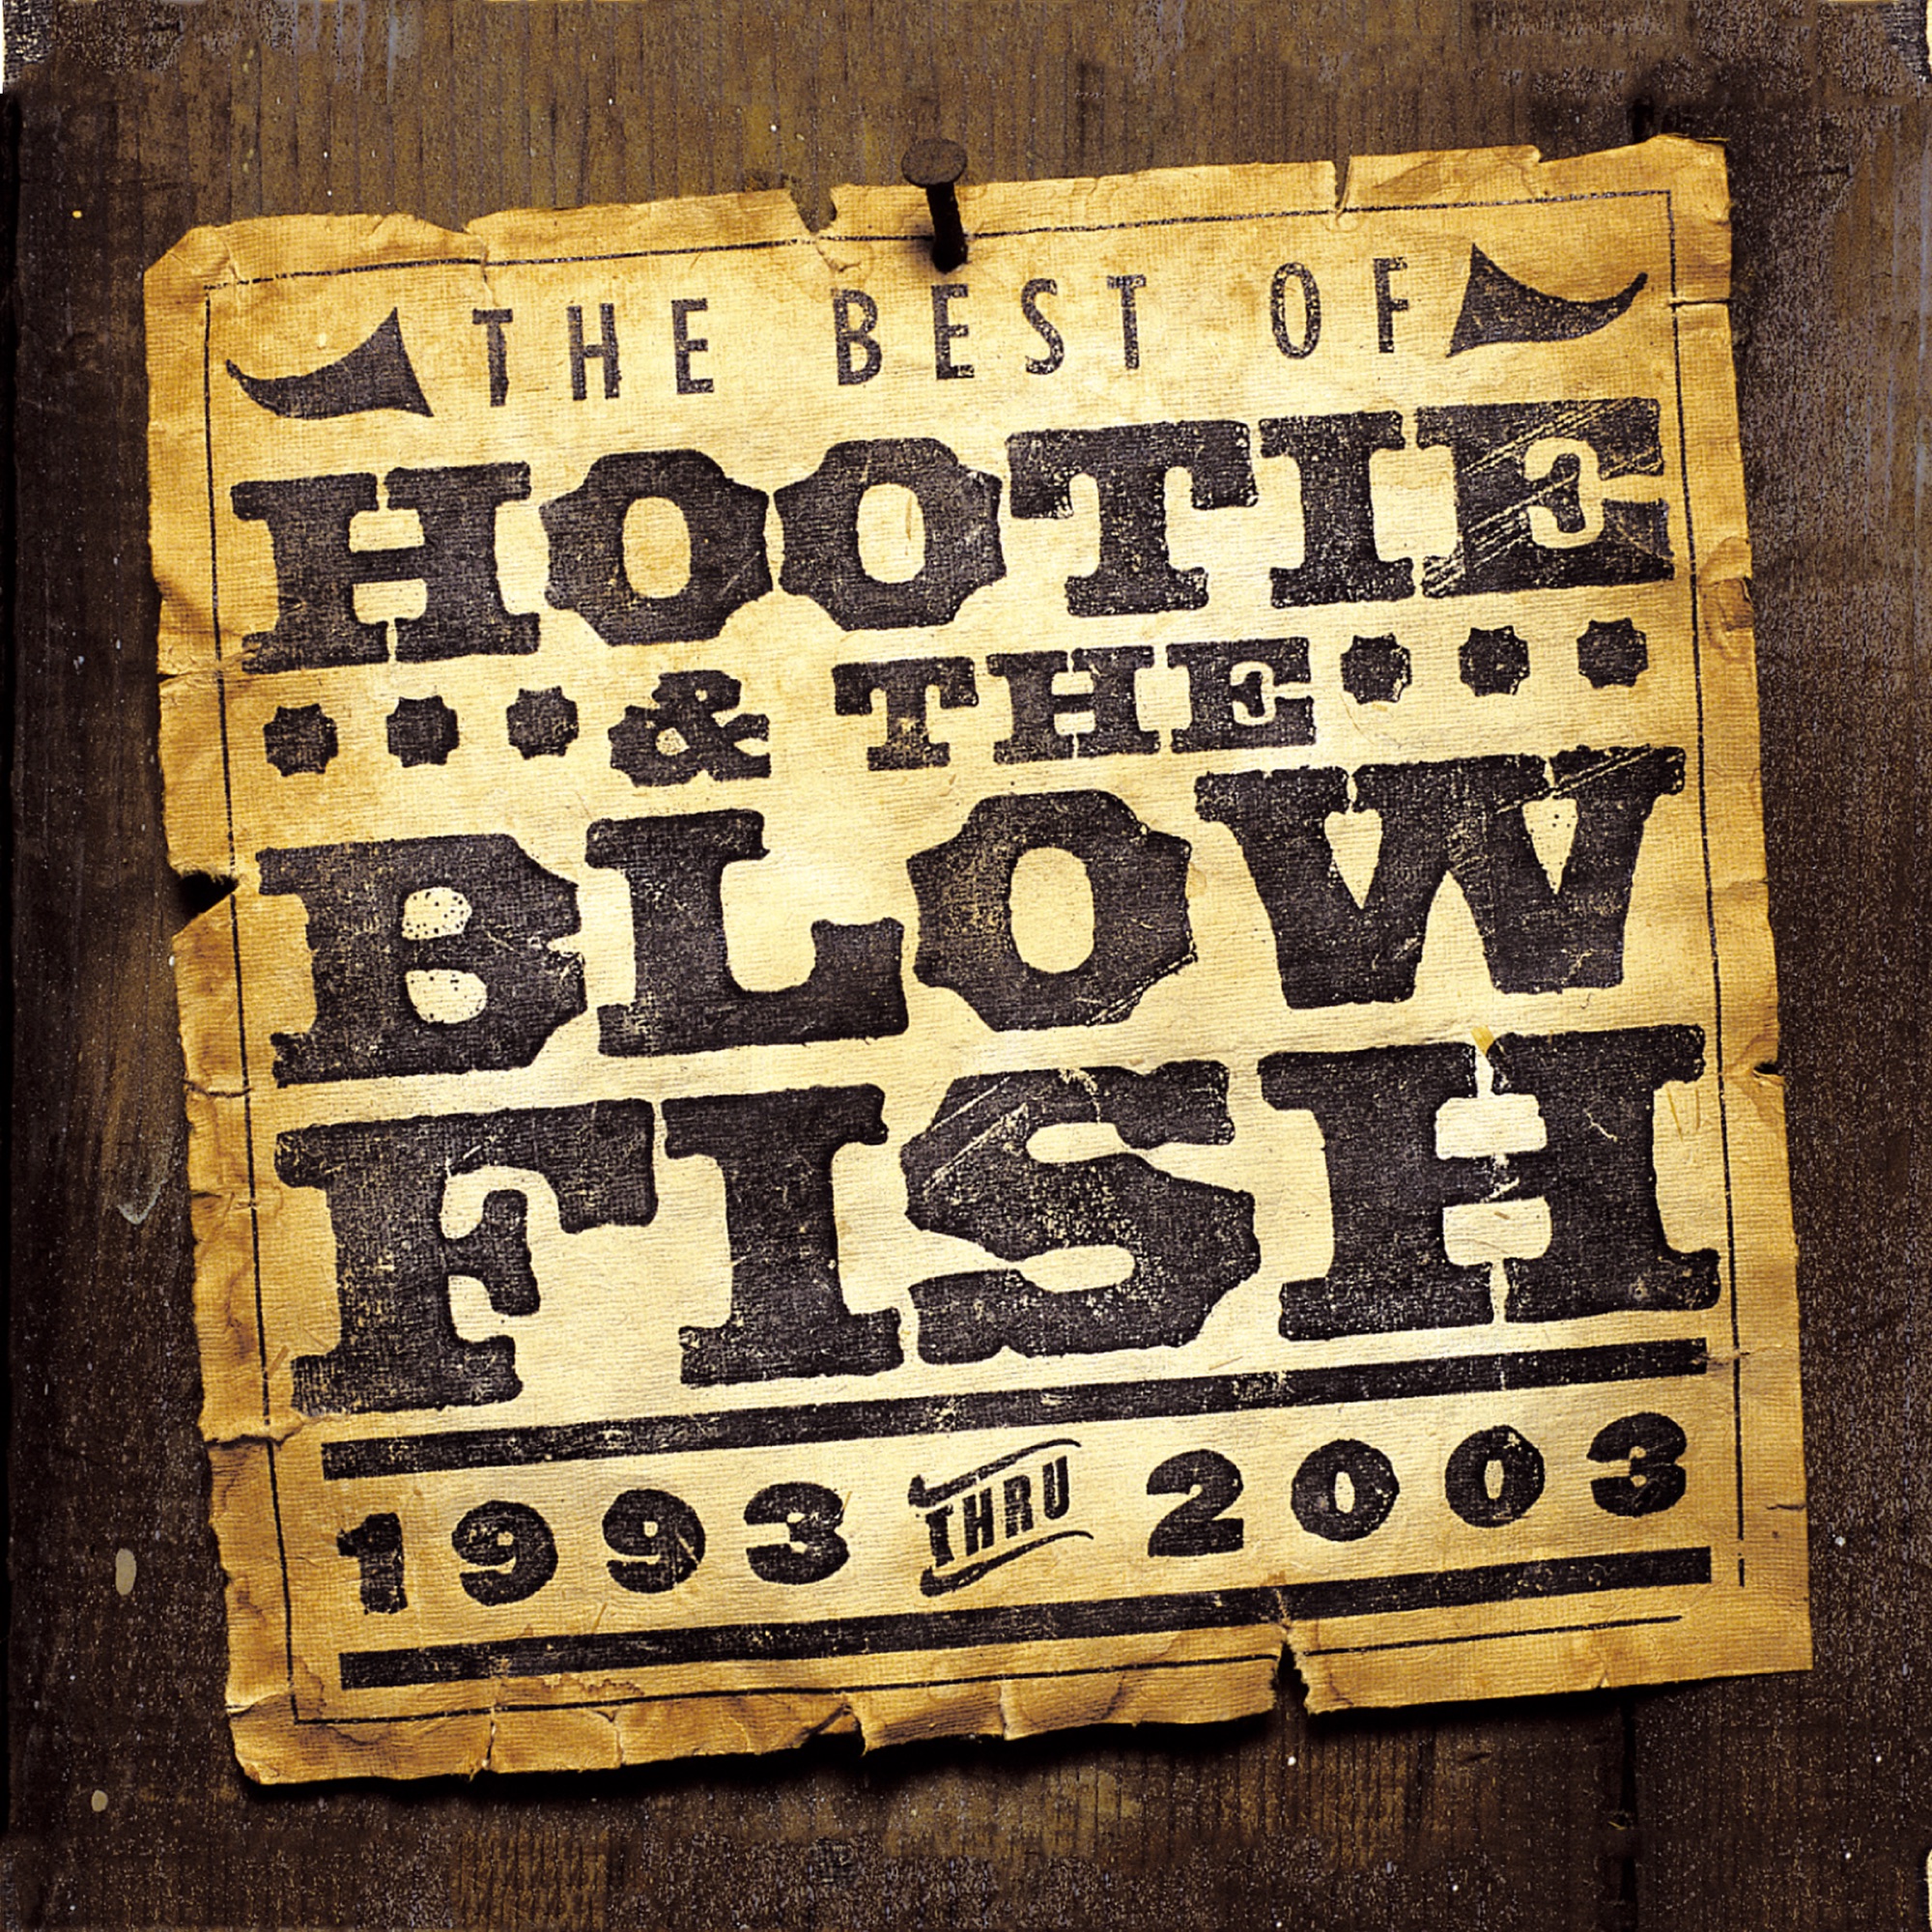 Art for Hold My Hand by Hootie & The Blowfish